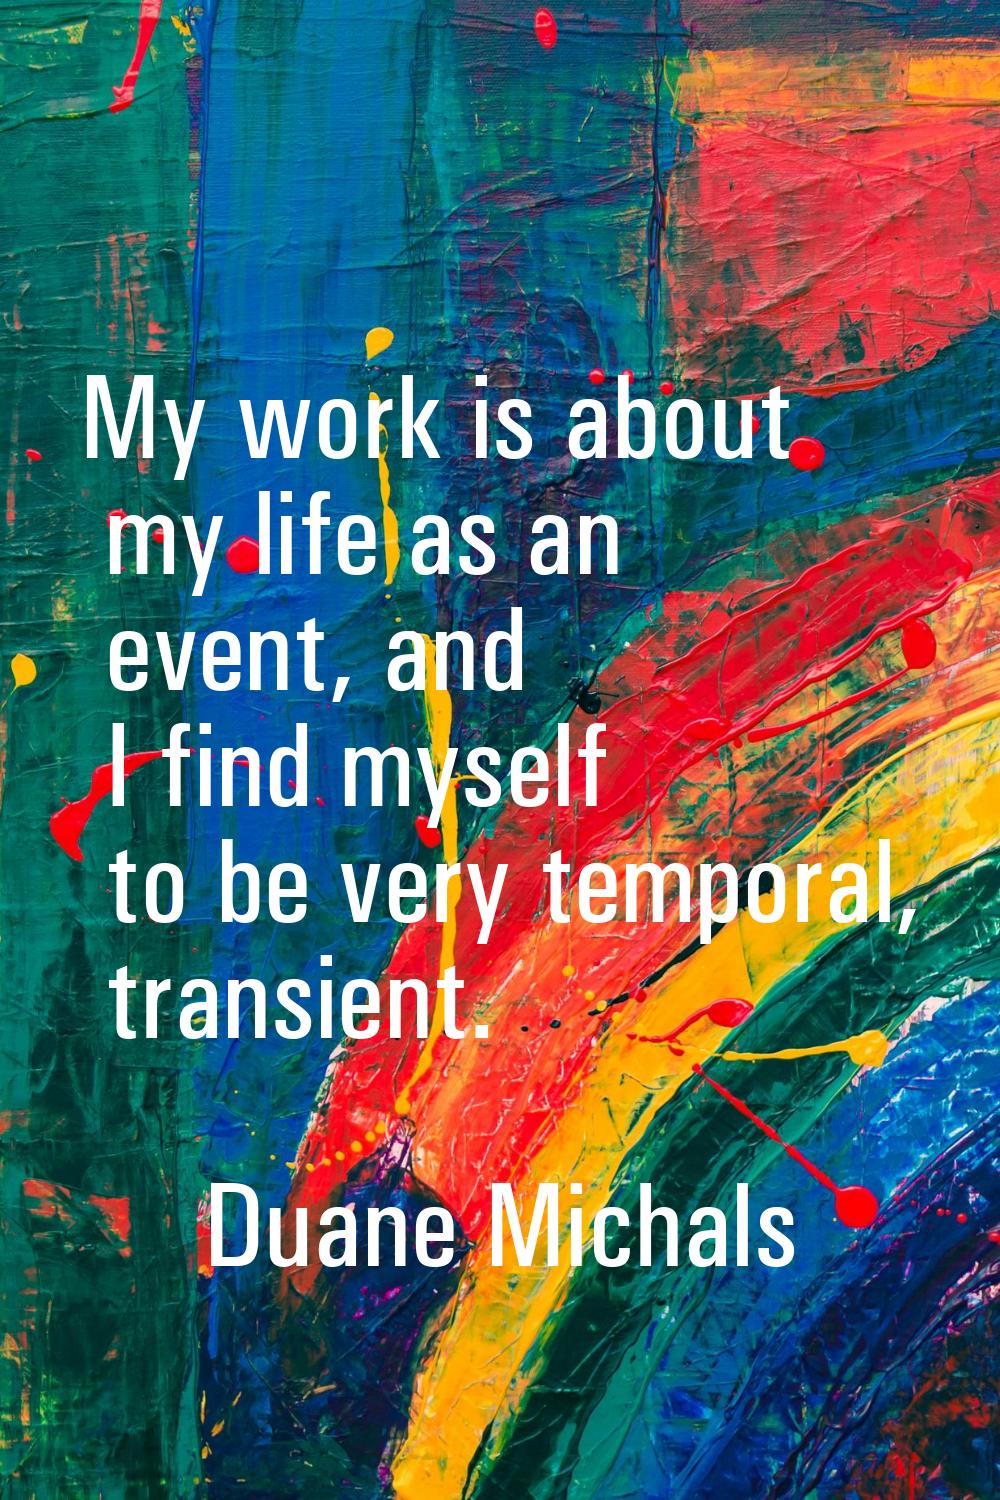 My work is about my life as an event, and I find myself to be very temporal, transient.